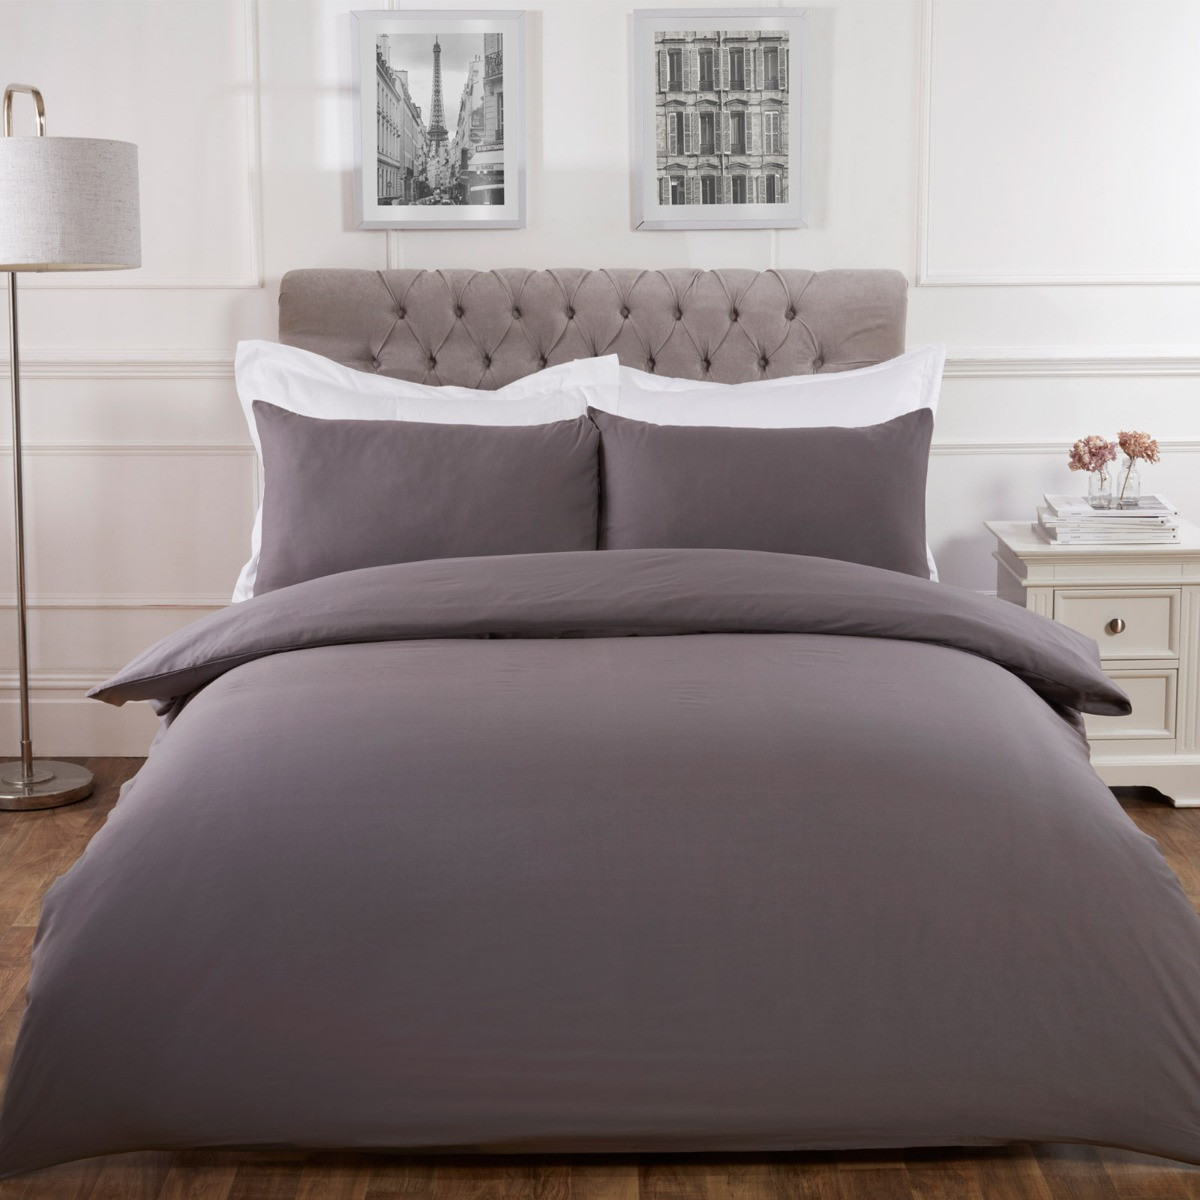 Highams Easy Care Polycotton Duvet Cover Set - Charcoal Grey>